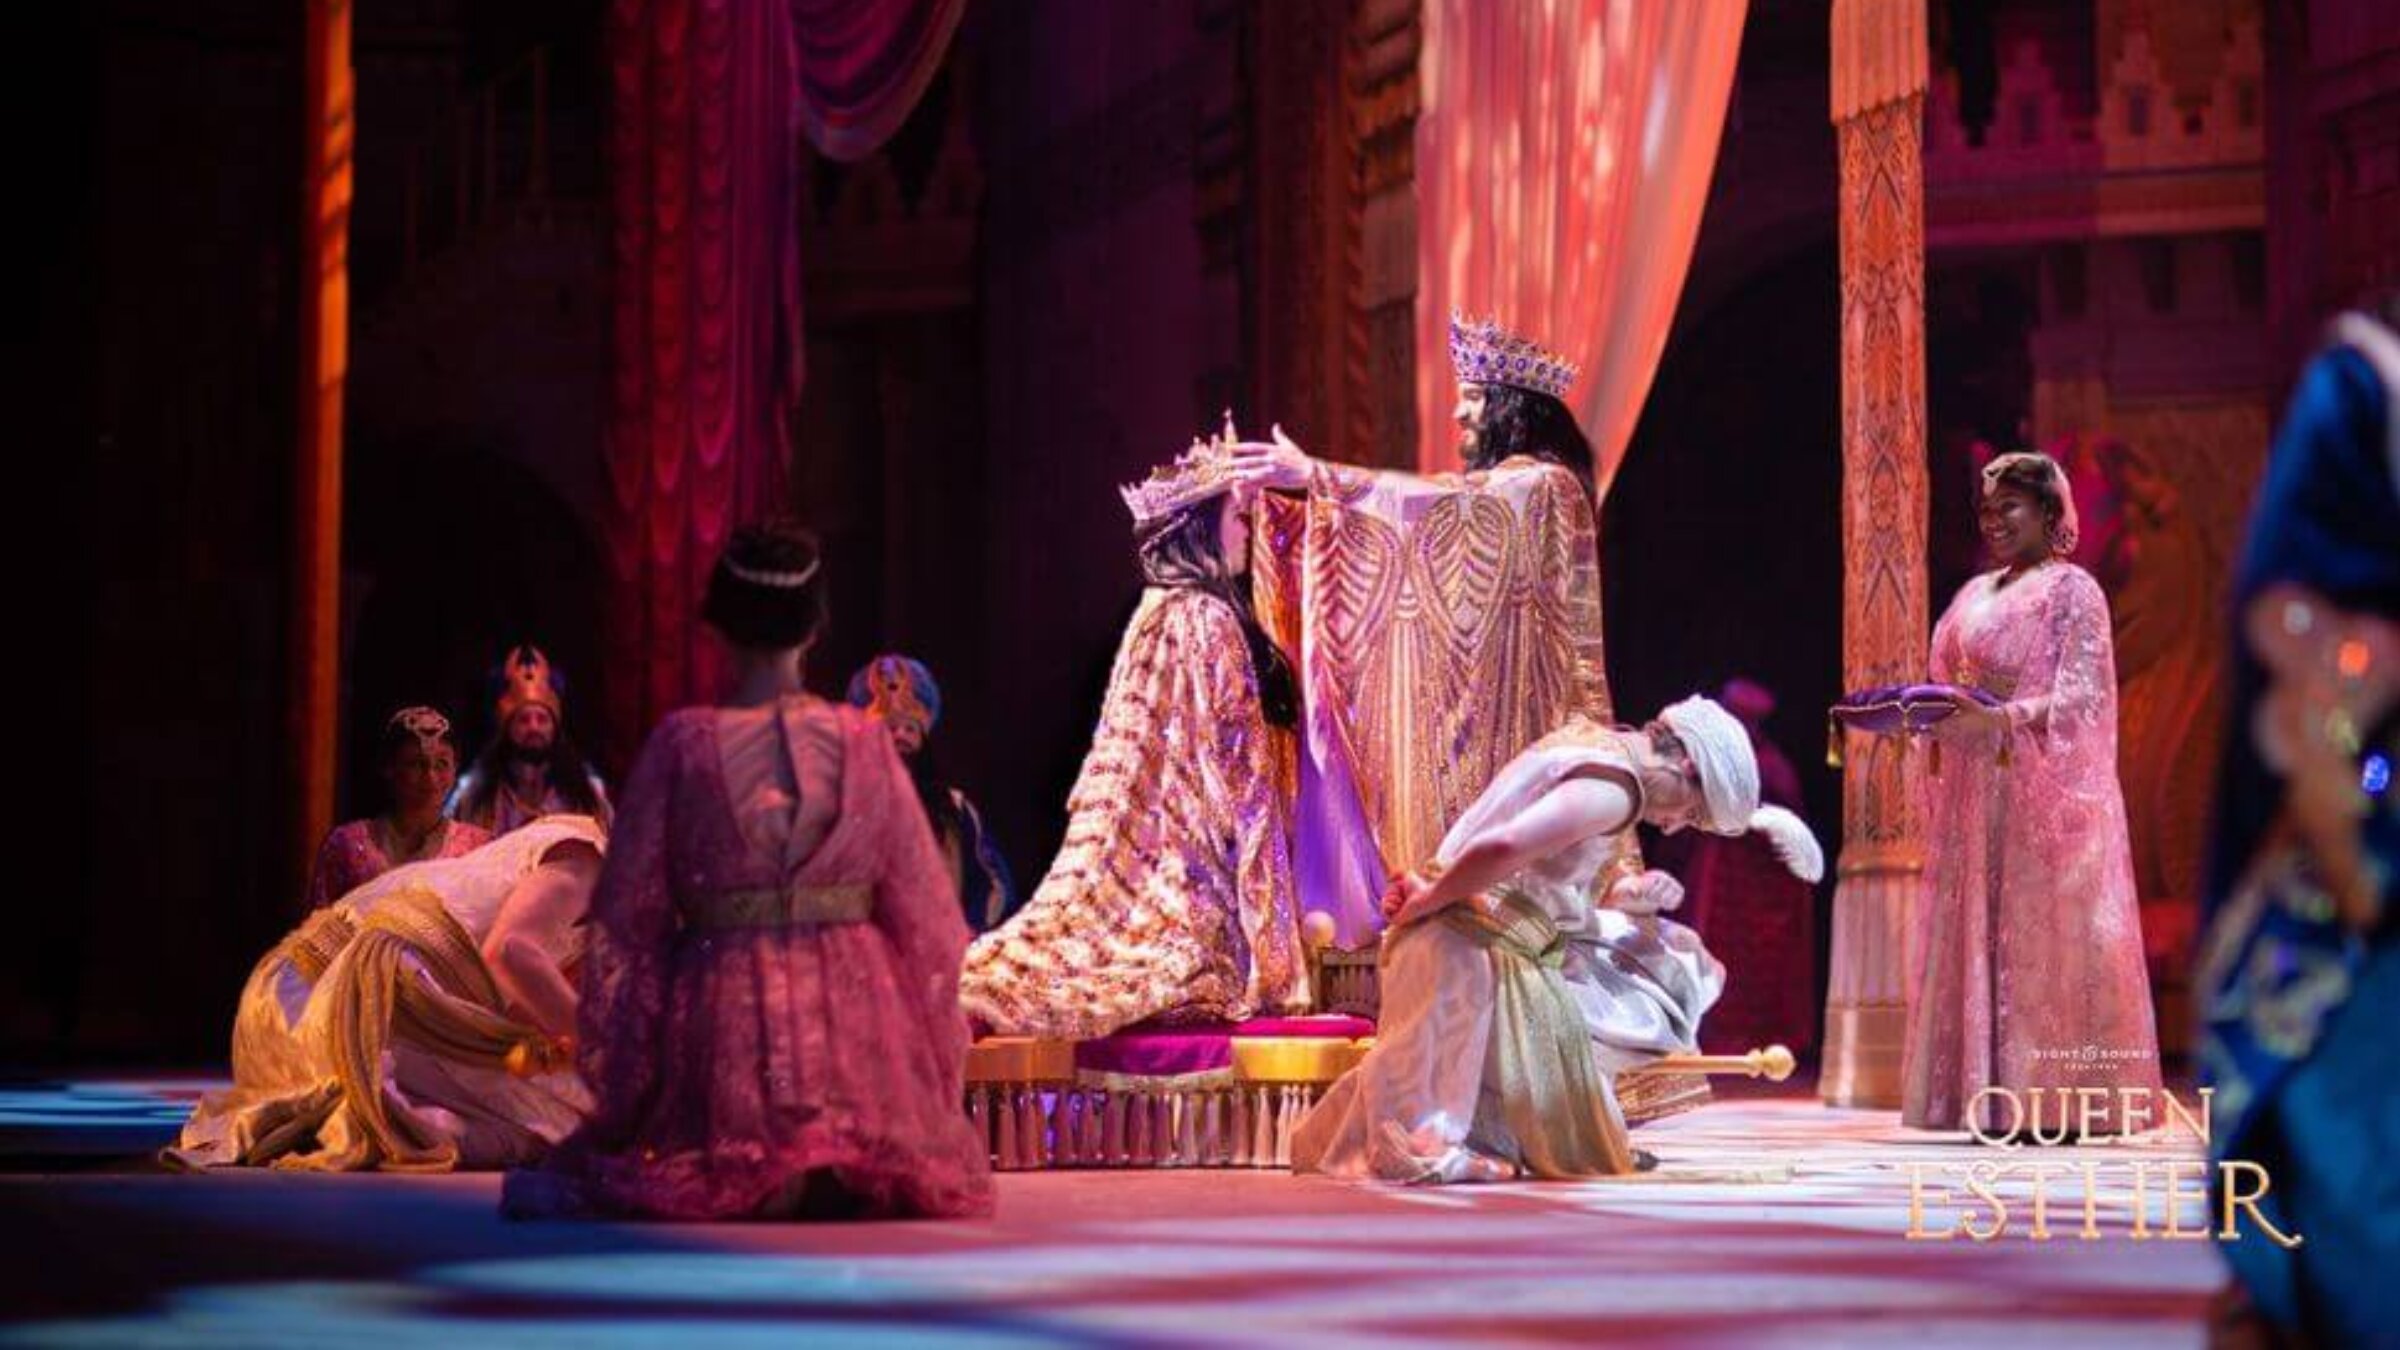 Esther is crowned at Sight & Sound’s production of “Queen Esther.”